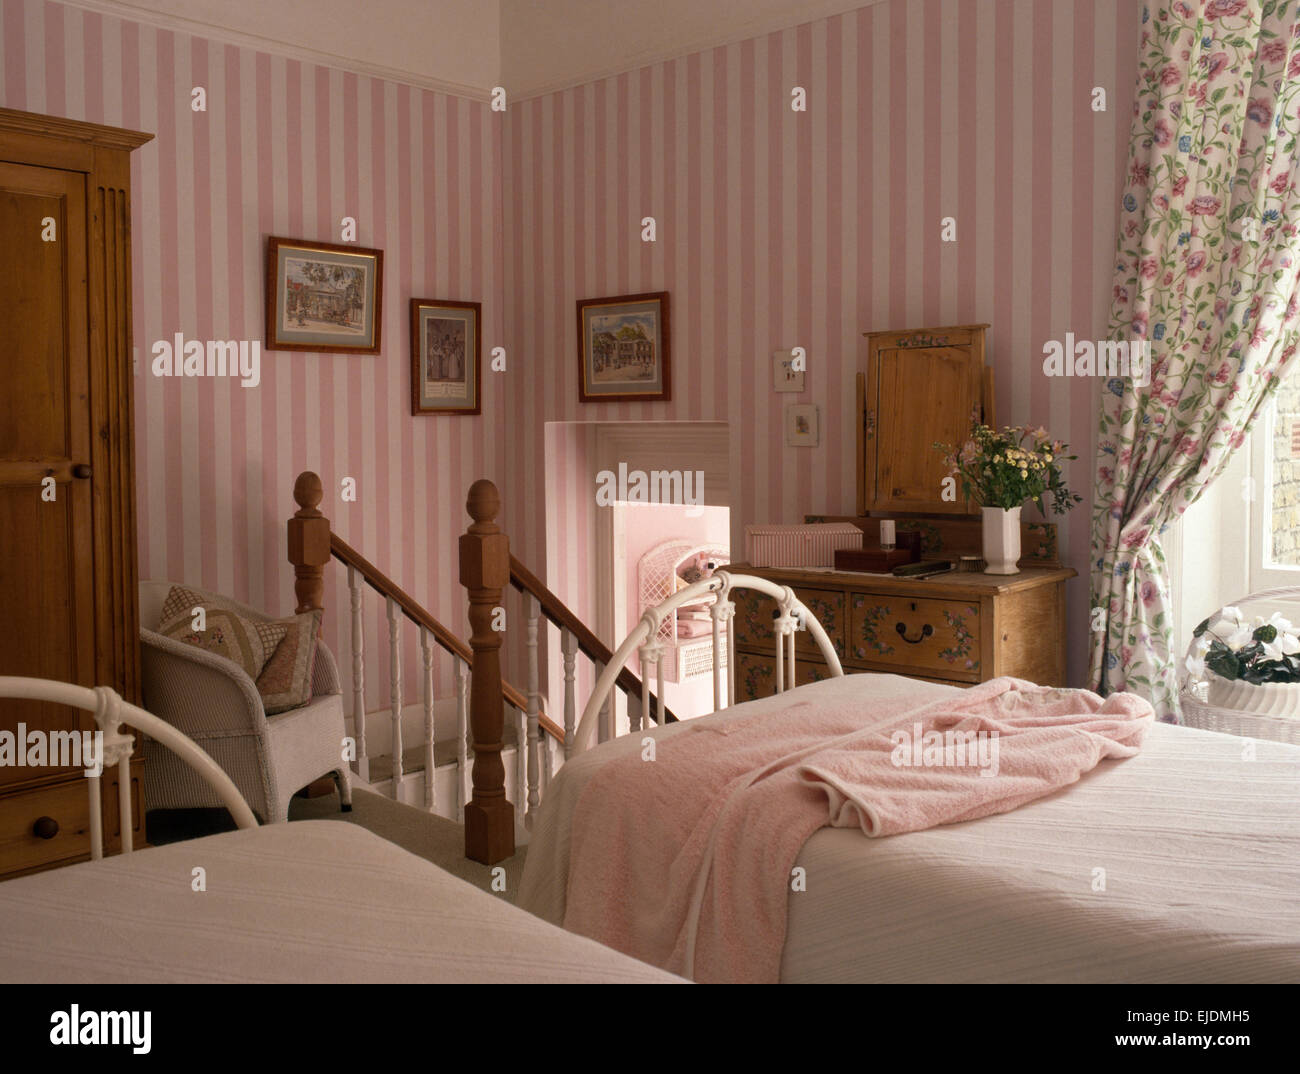 Pink Striped Wallpaper In Country Bedroom With White Wrought